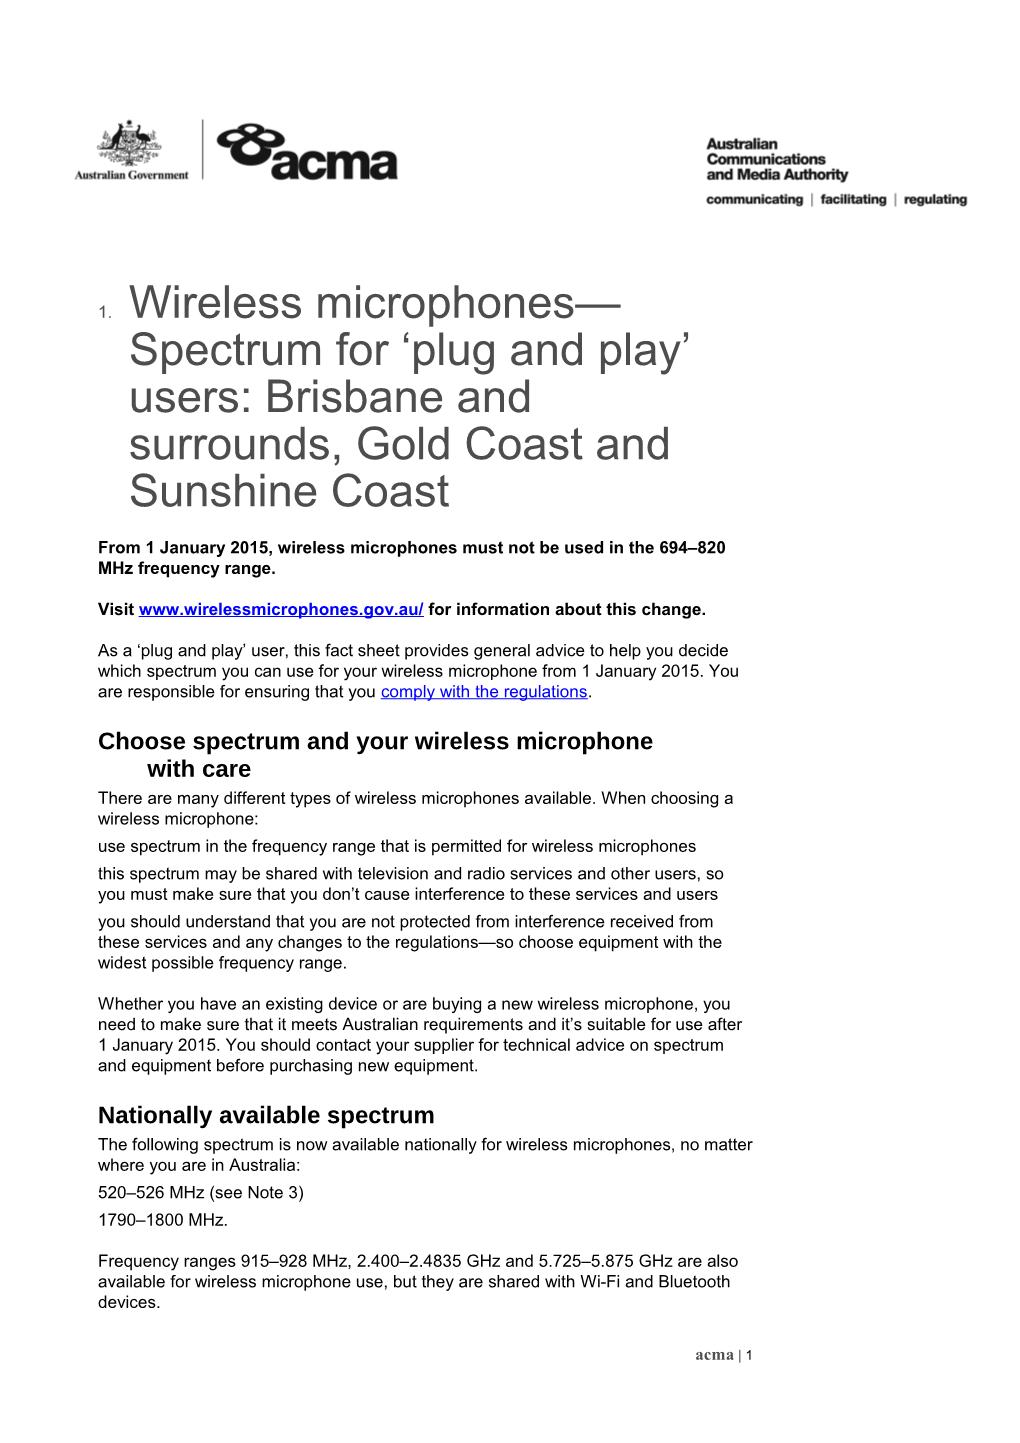 From 1 January 2015, Wireless Microphones Must Not Be Used in the 694 820 Mhz Frequency Range